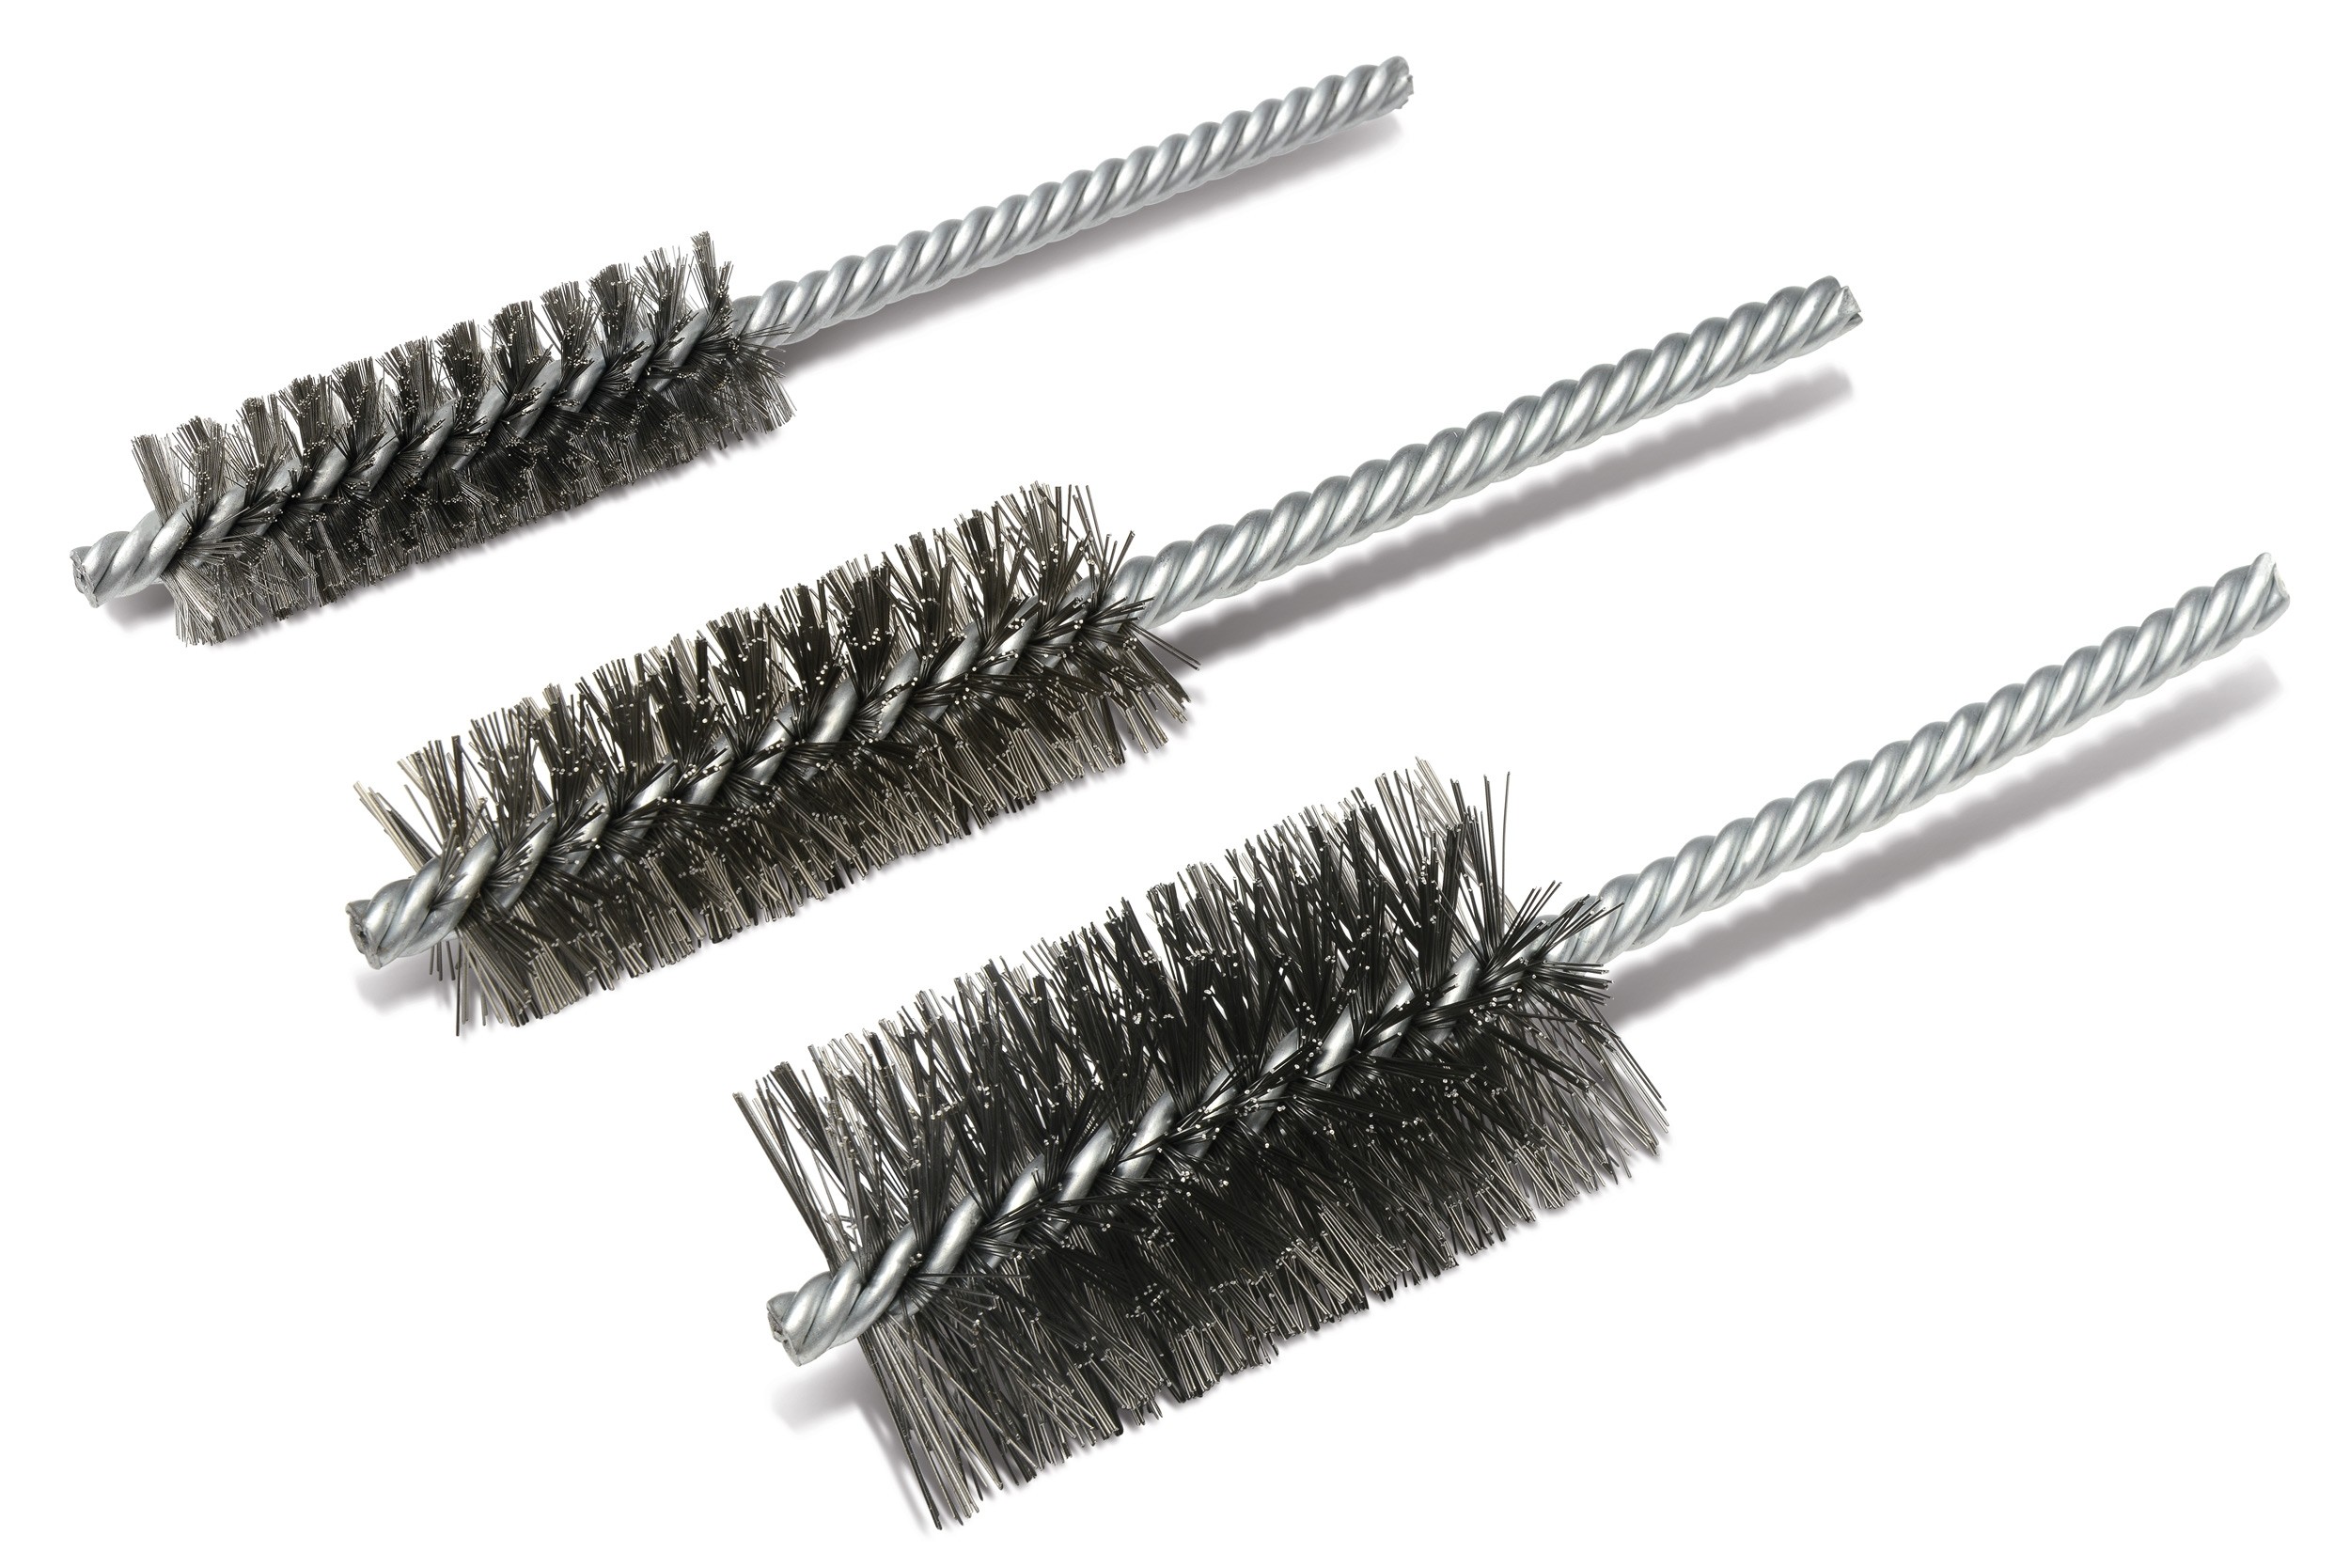 1 Weiler 21124 Power Tube Brush Double Stem/Double Spiral Pack of 10 2-1/2 Length 0.06 Stainless Steel Wire Fill 